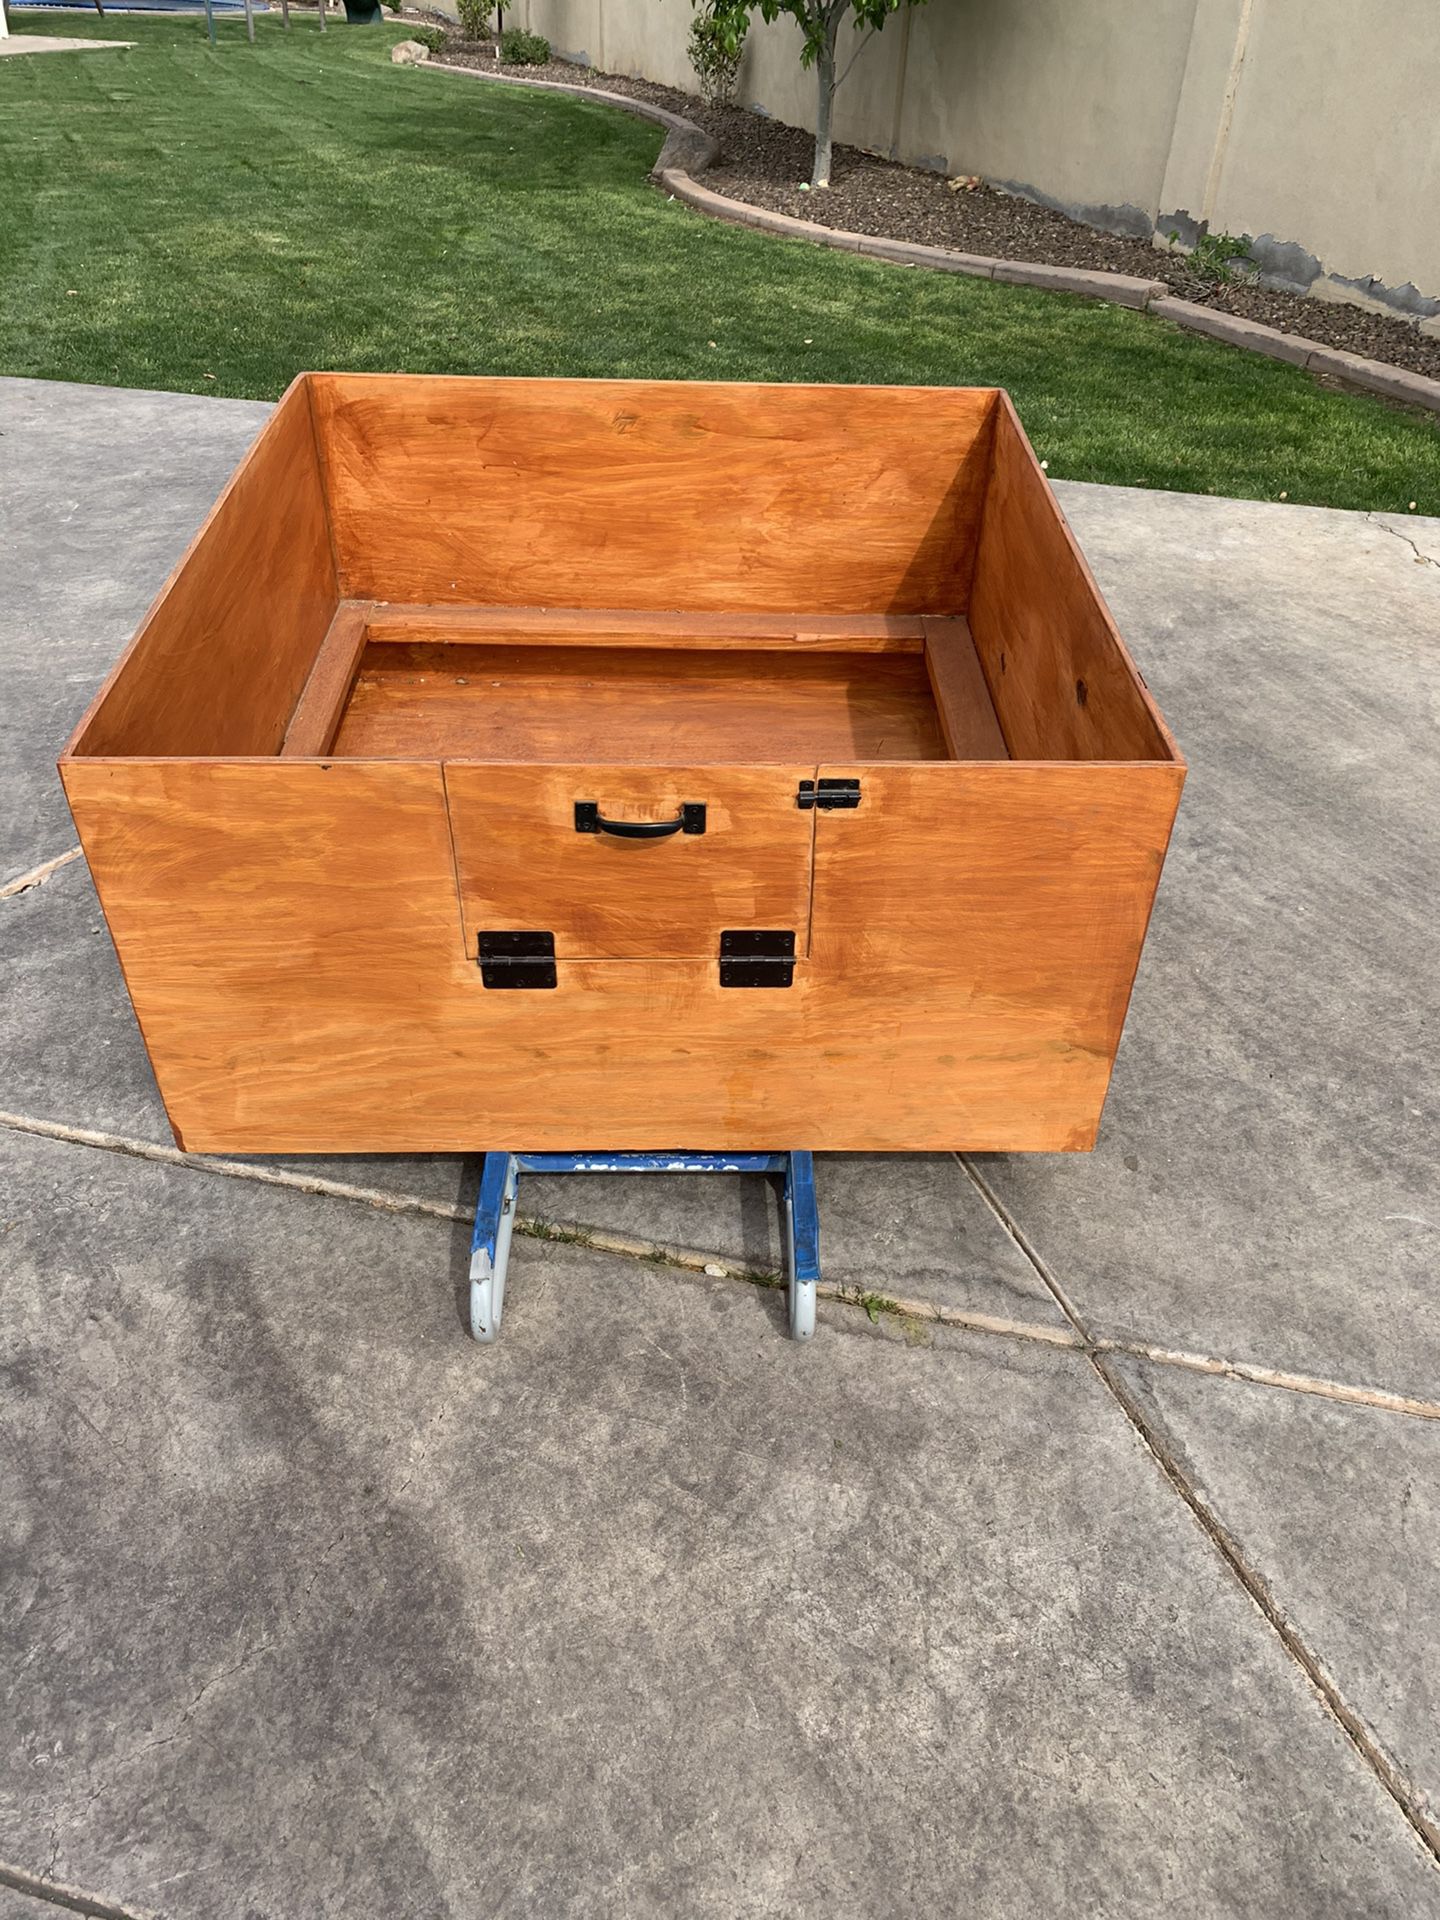 Welping box 4x4. Waterproof and solid. Complete with puppy rails and hinged door